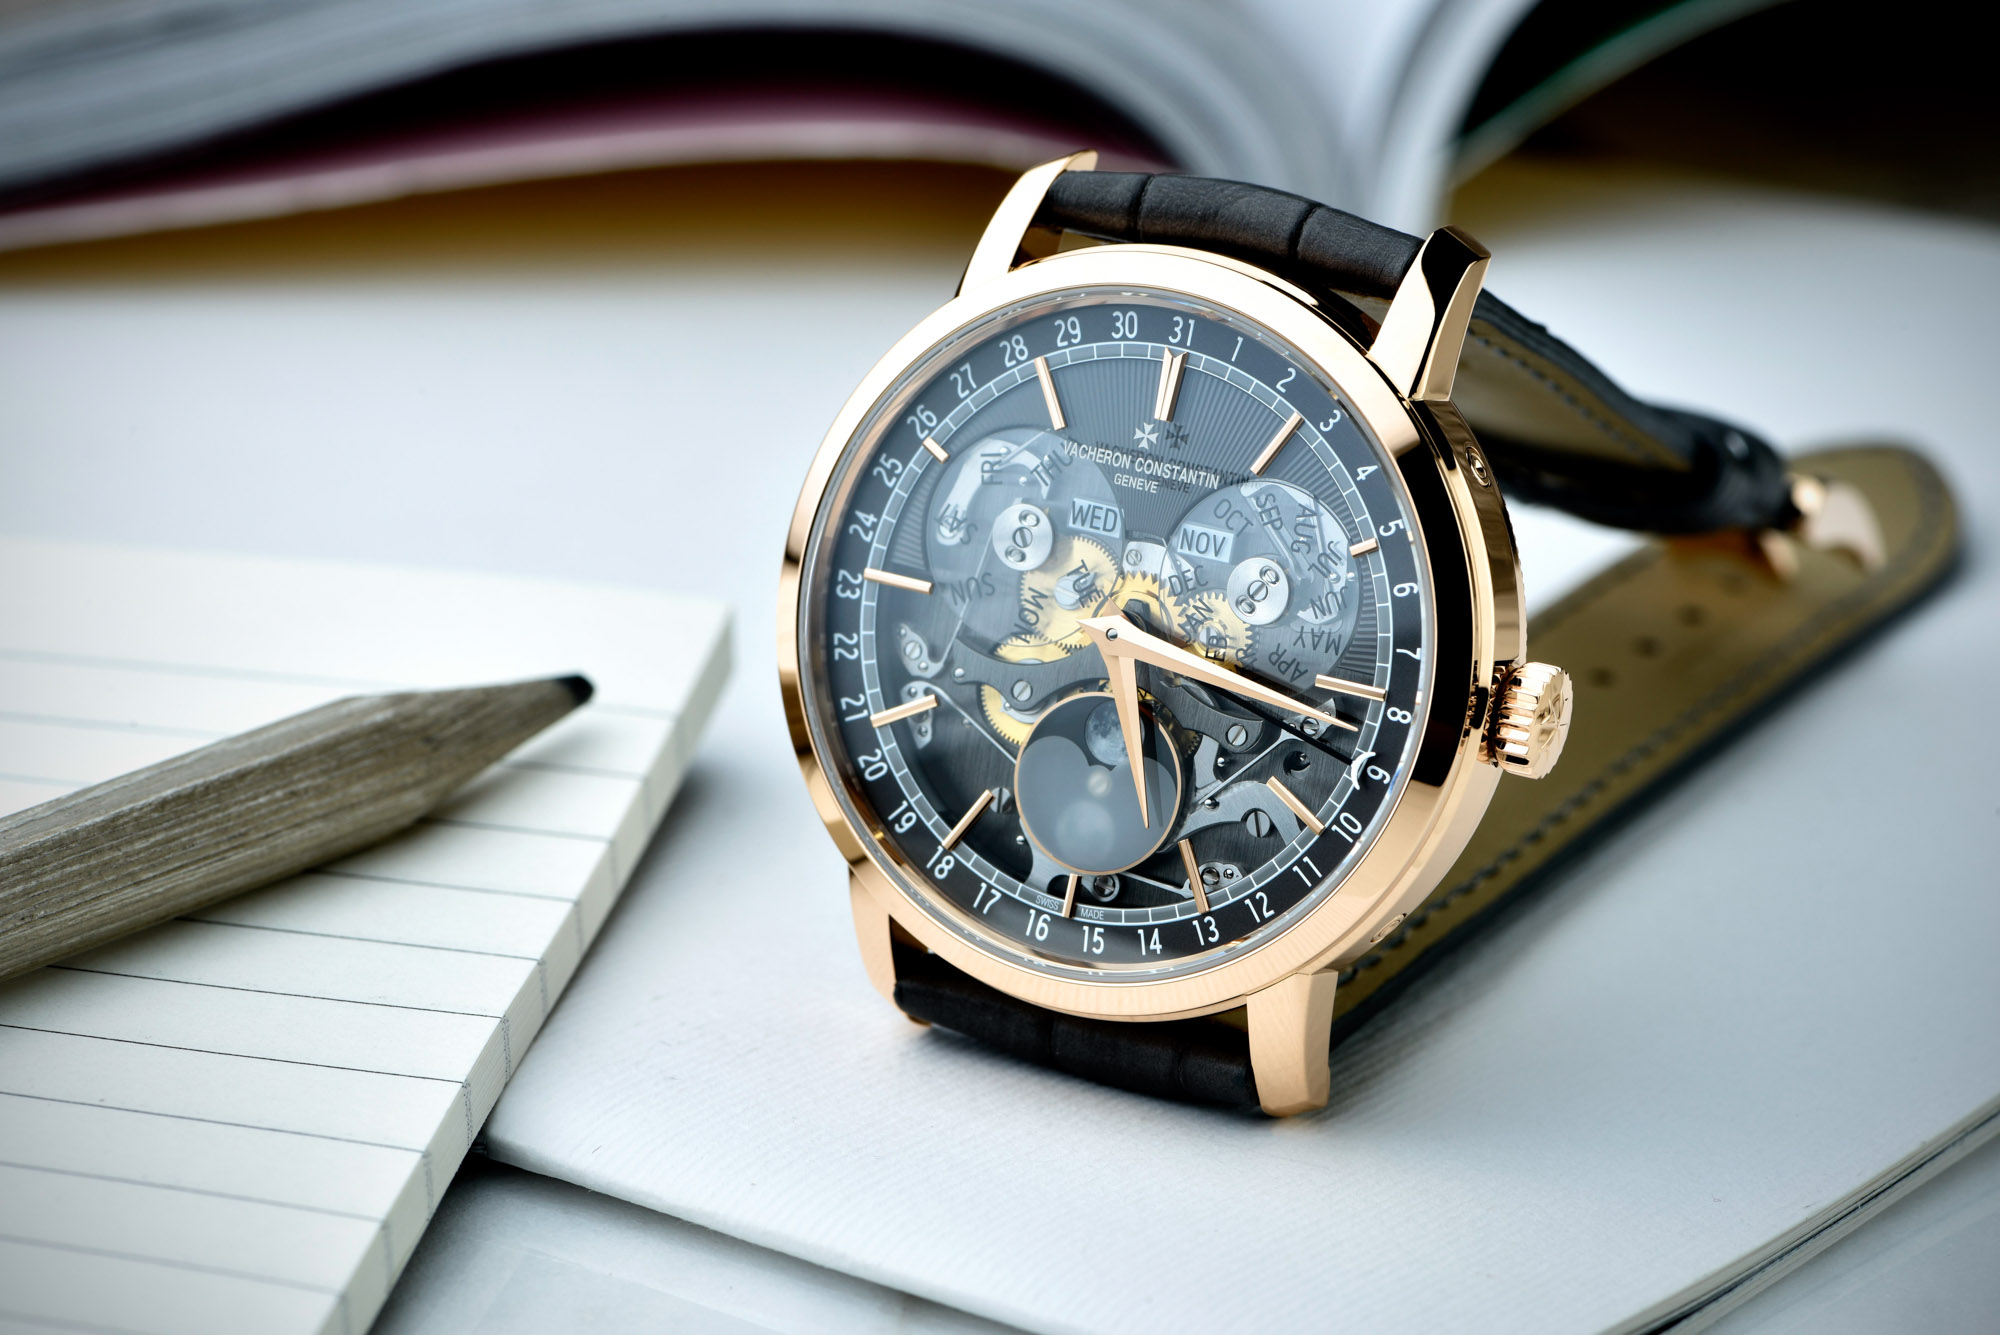 Comparative review - 3 Modern Worldtimer Watches from Vacheron